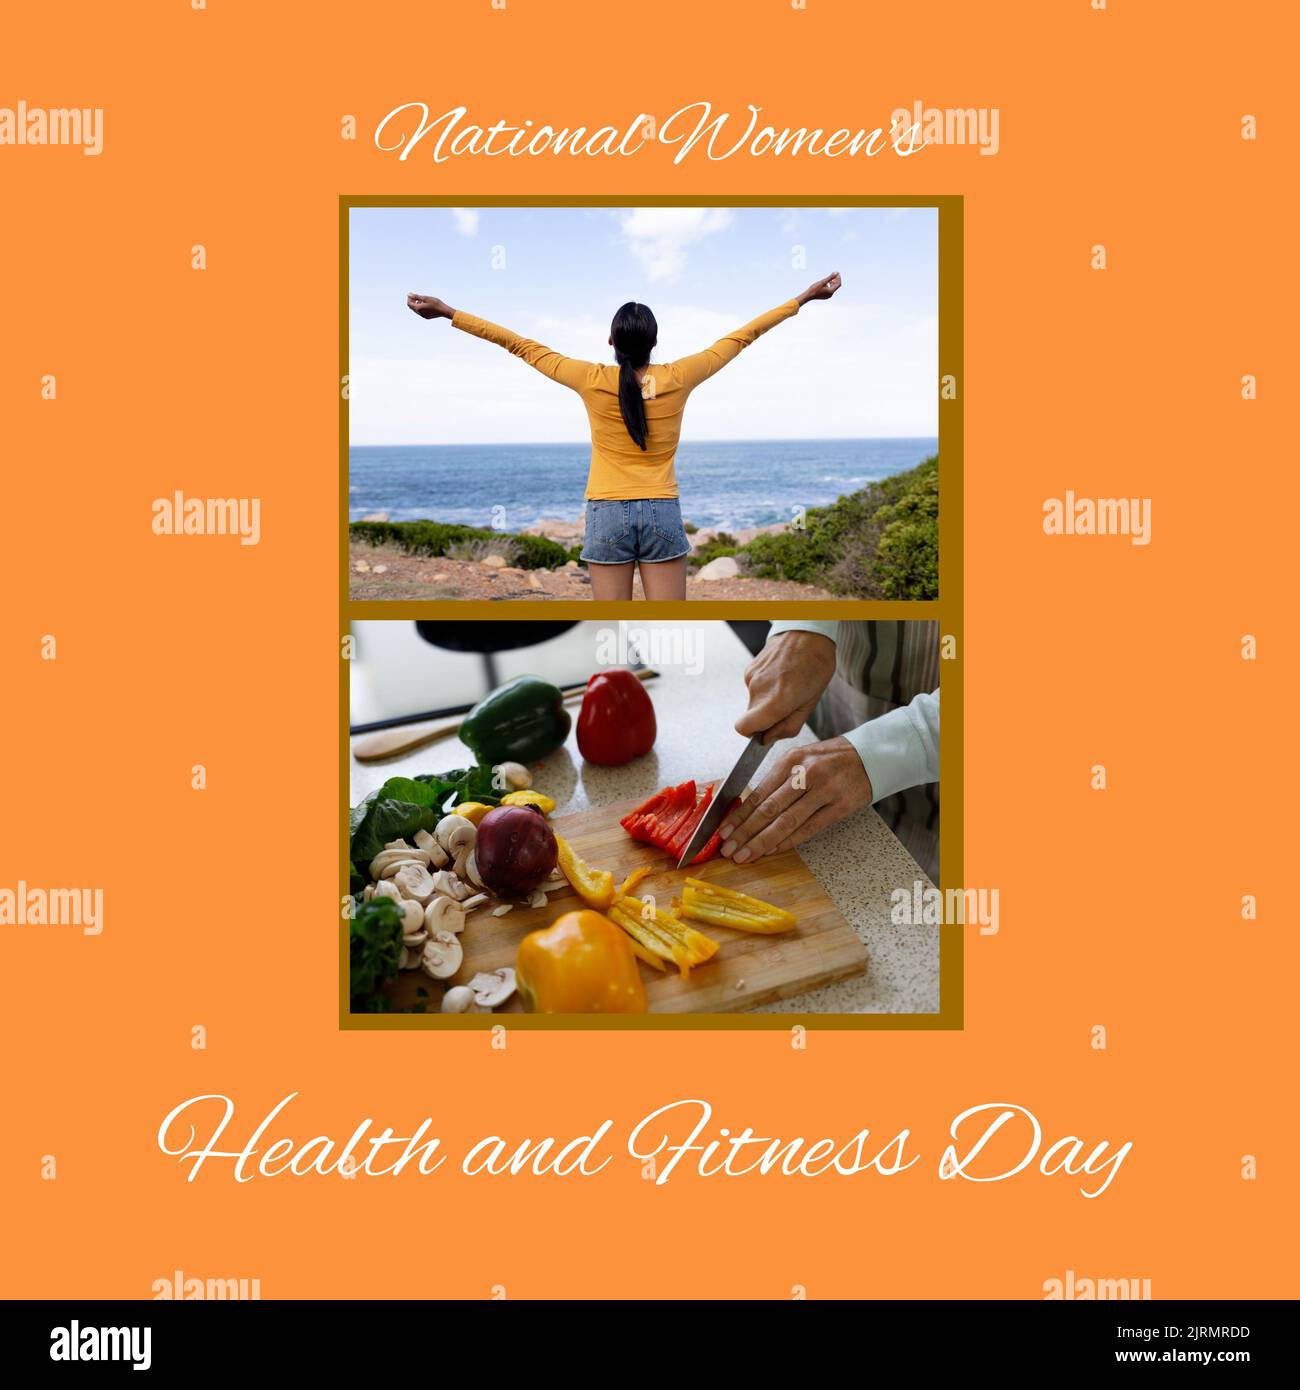 Collage of caucasian women looking at sea and cutting vegetables, women's health and fitness day Stock Photo